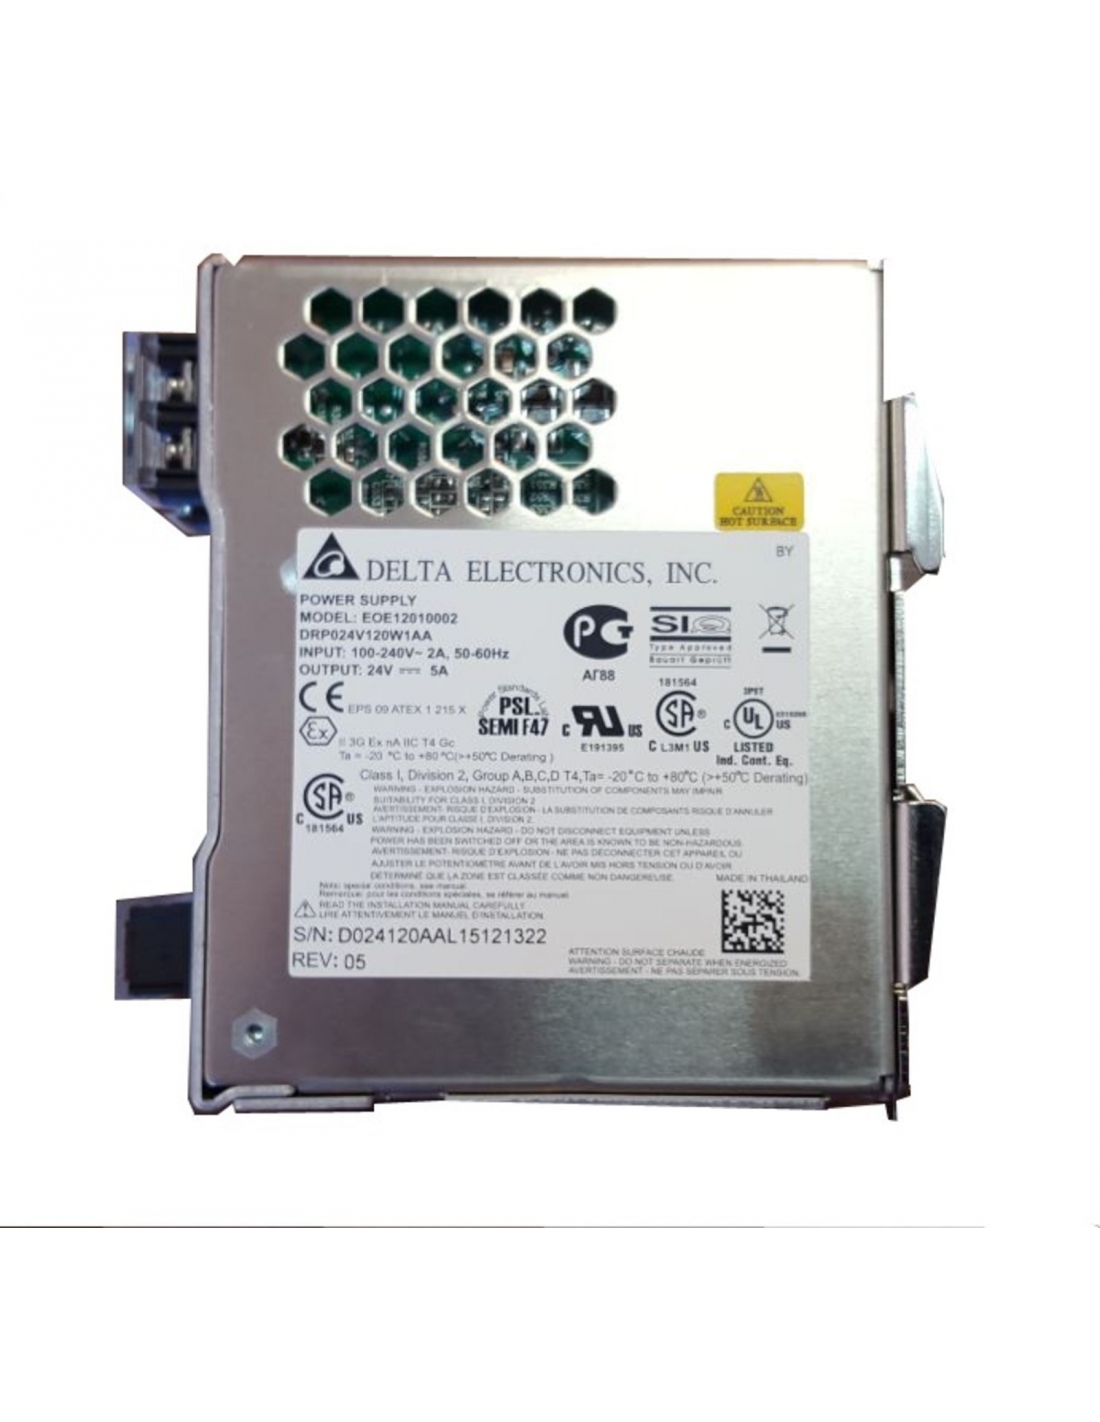 Pack of 1 AD1120-24F 120W/5A DIN-RAIL 24VDC POWER SUP 